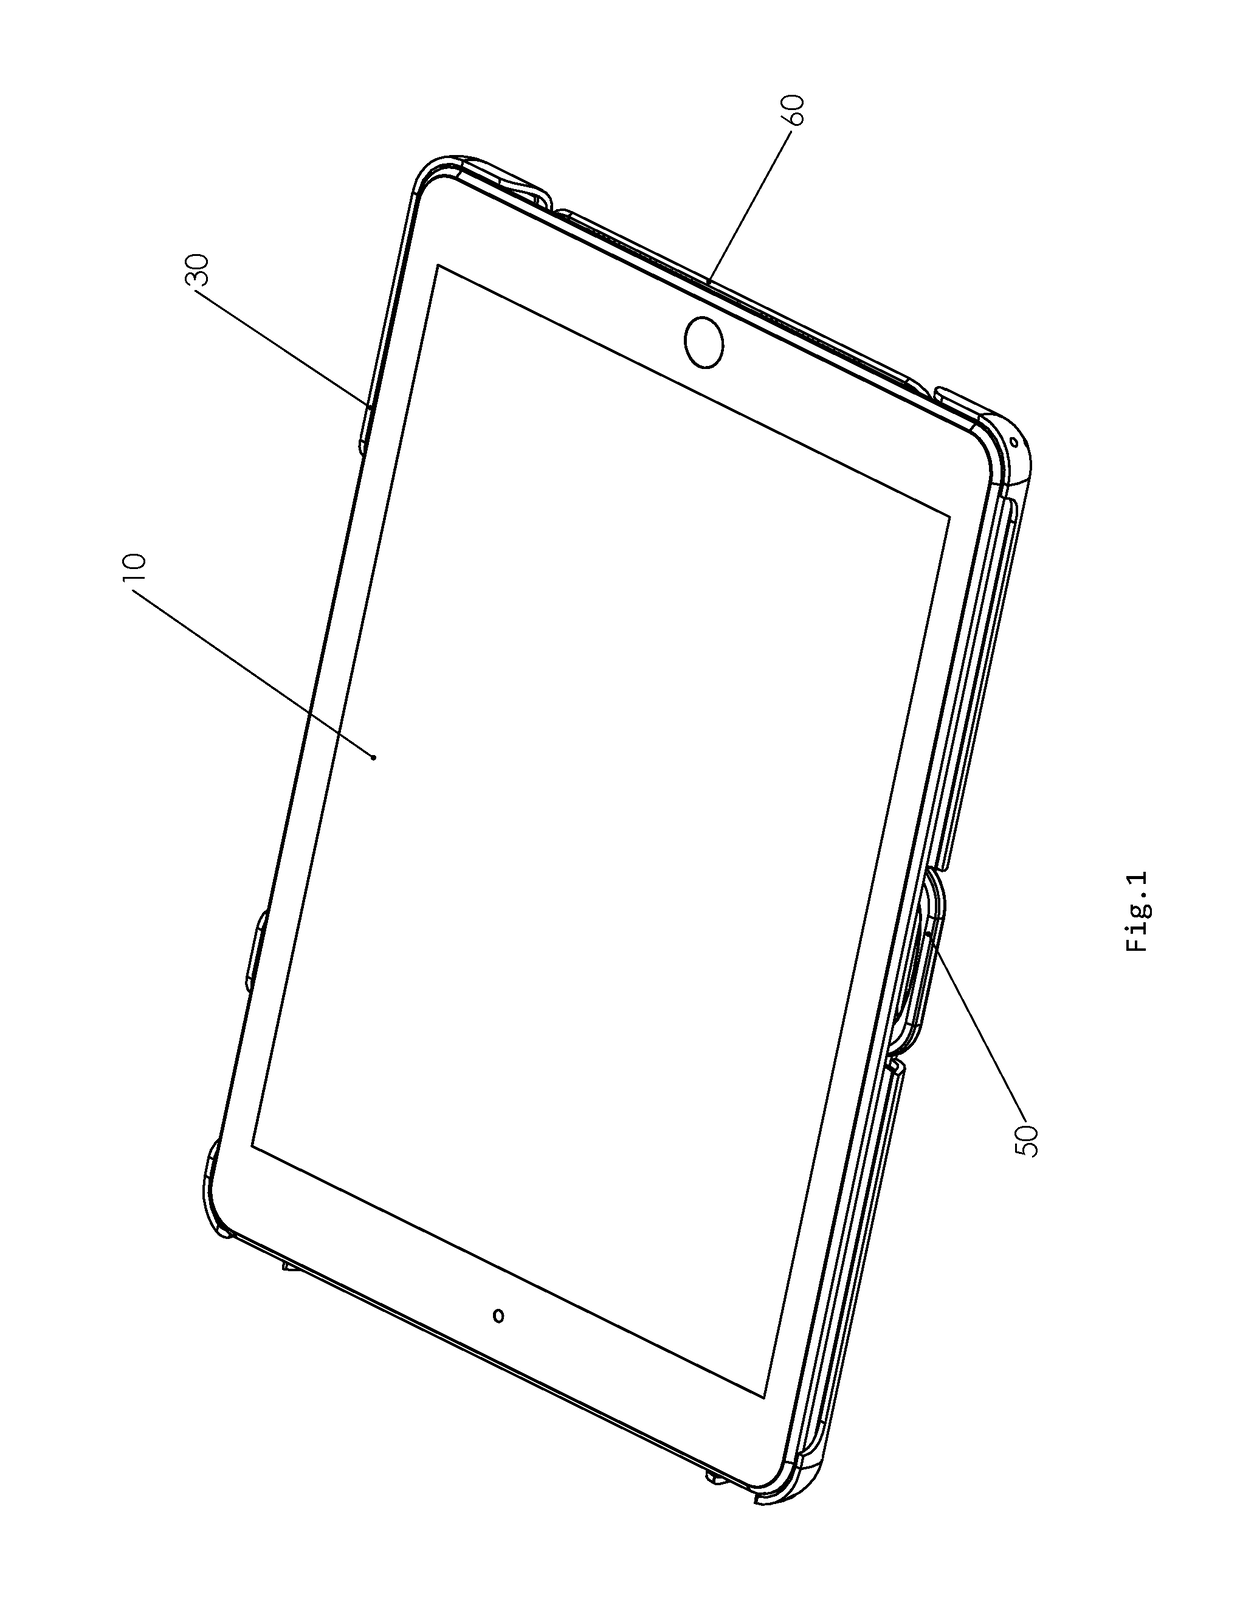 Enclosure for Electronic Devices